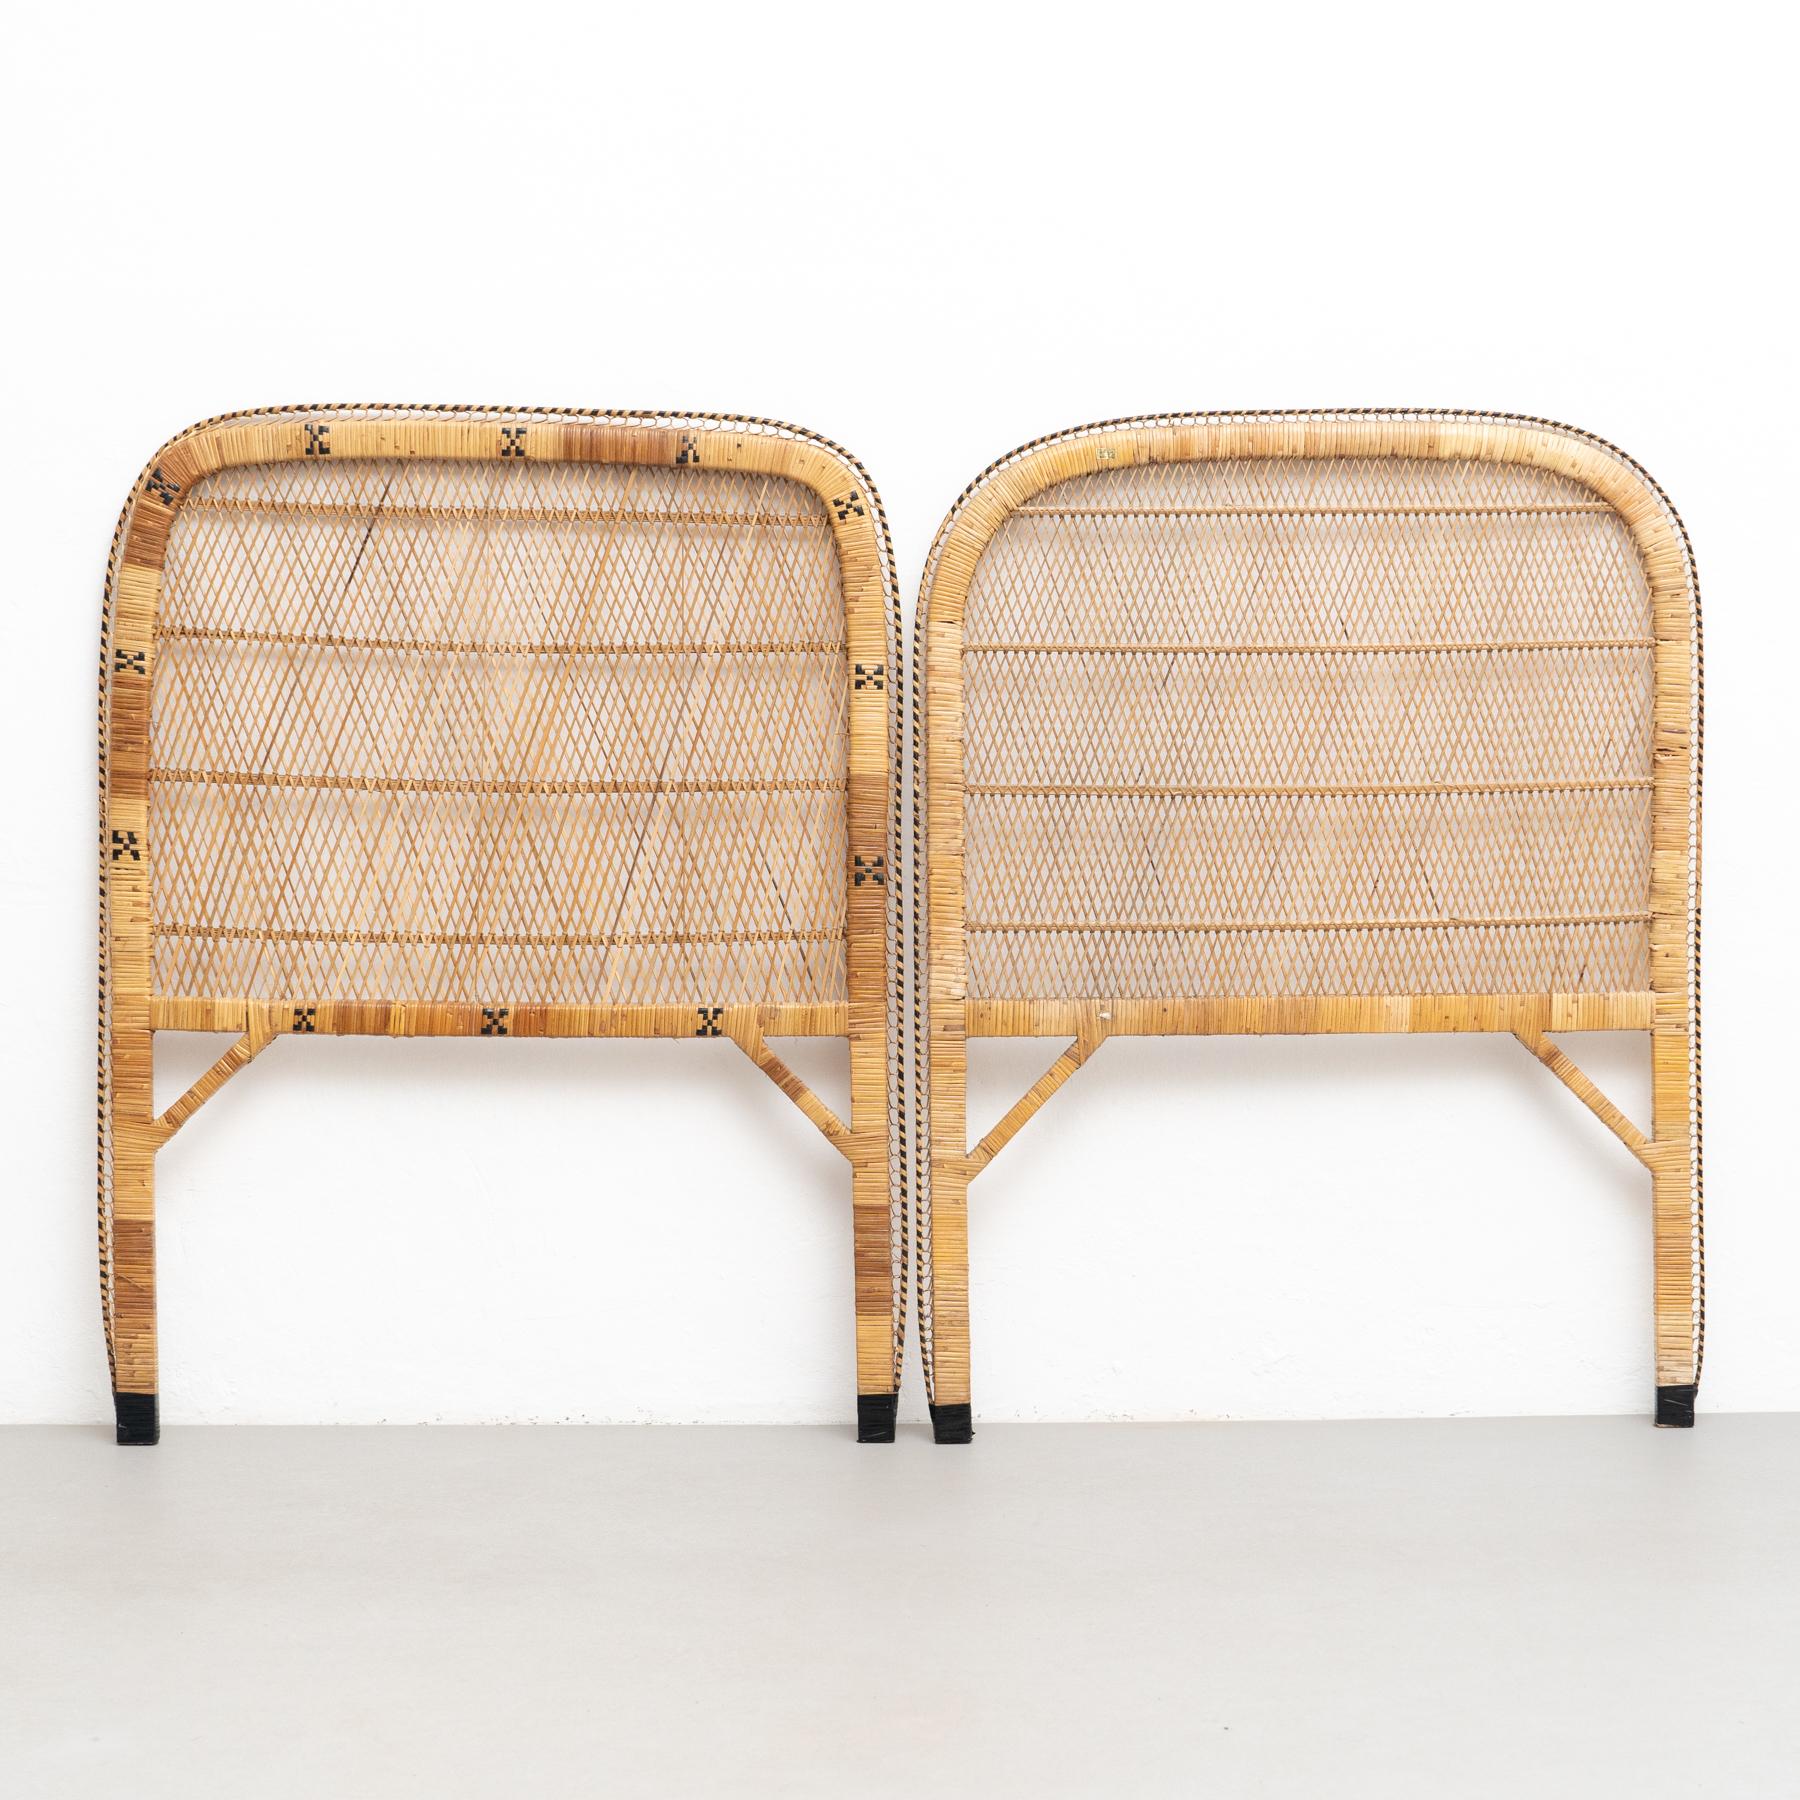 Pair of Mid-Century Modern bamboo and rattan headboard, circa 1960.

Traditionally manufactured in Philippines.

By unknown designer.

In original condition with minor wear consistent of age and use, preserving a beautiful